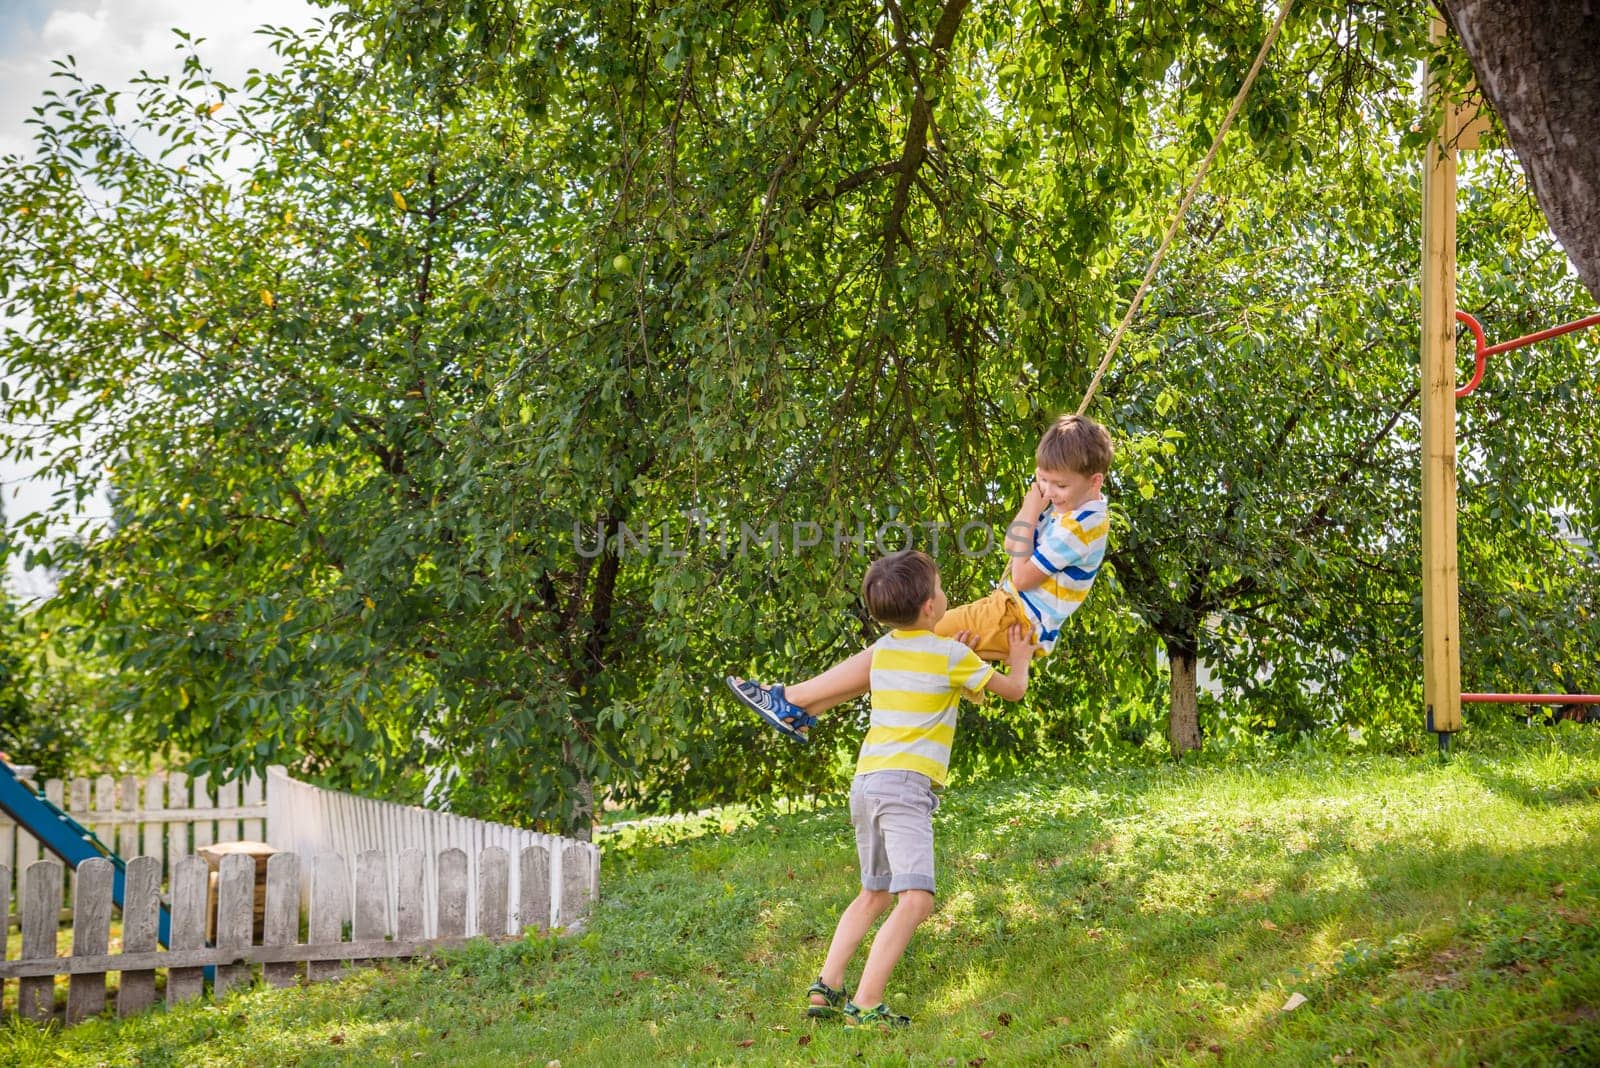 Two adorable happy little boys is having fun on a rope swing which he has found while having rest outside city. Active leisure time with children.